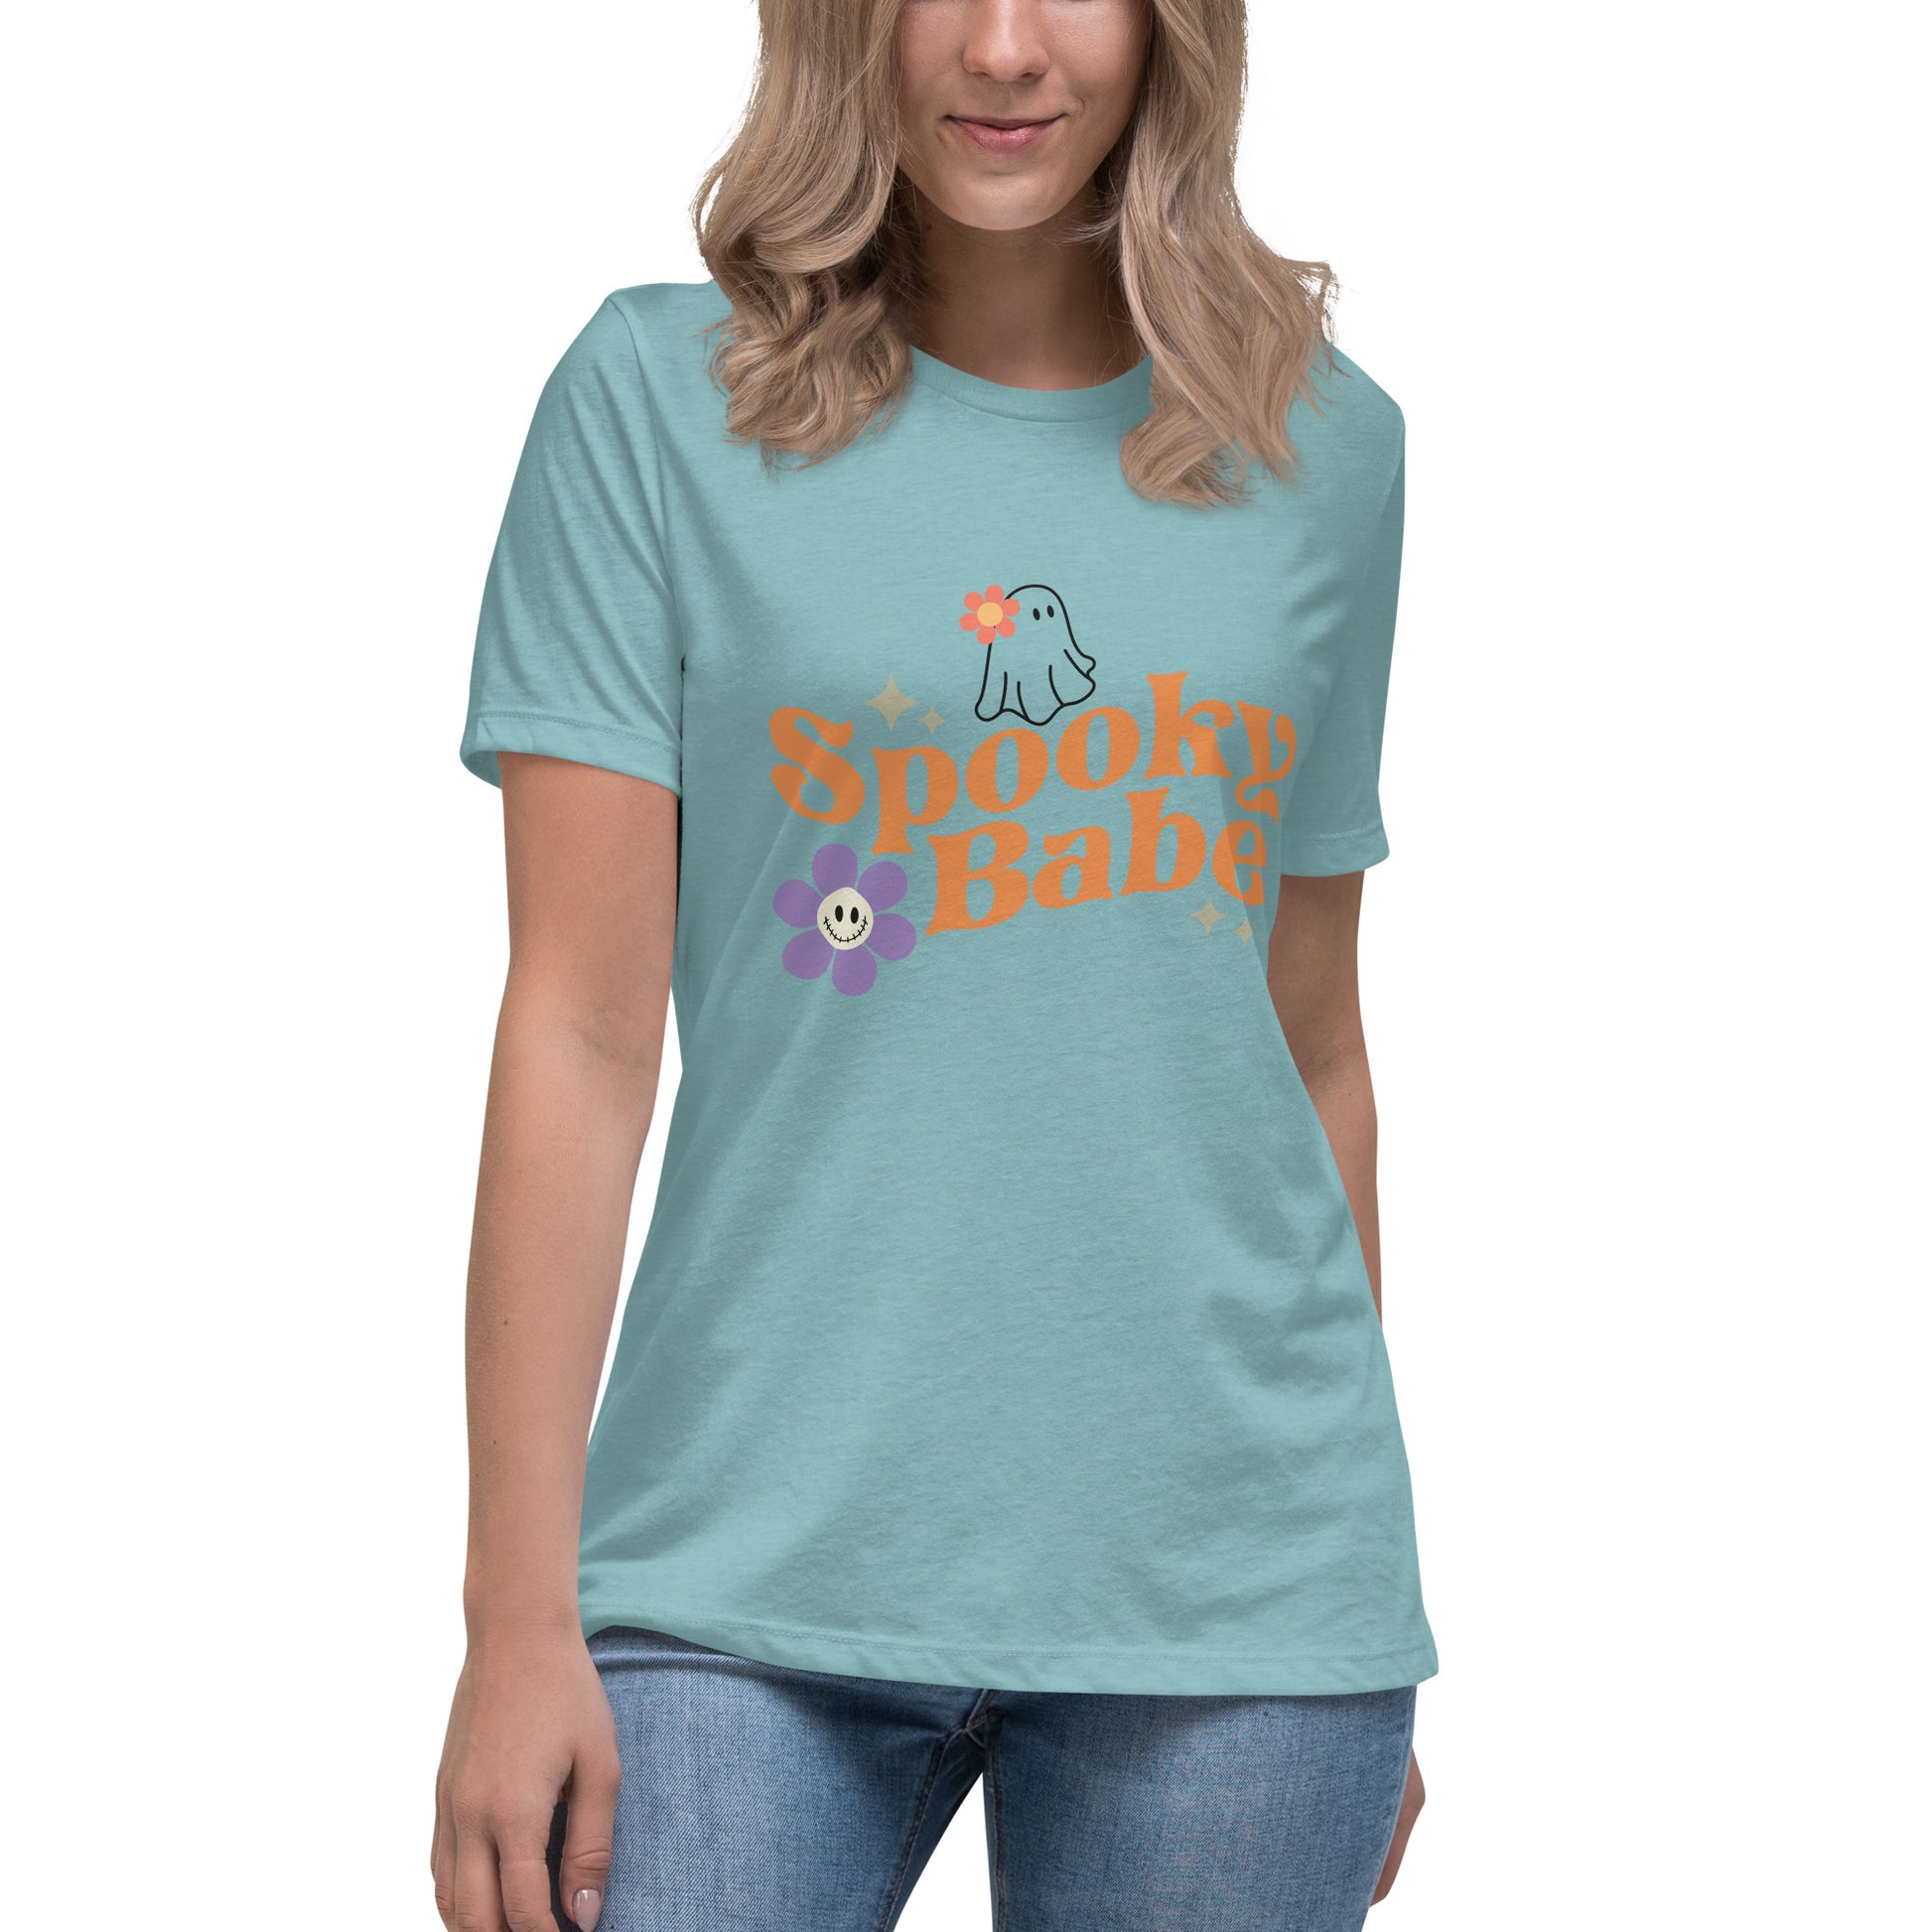 Spooky Babe Women's Relaxed T-Shirt Tee Tshirt